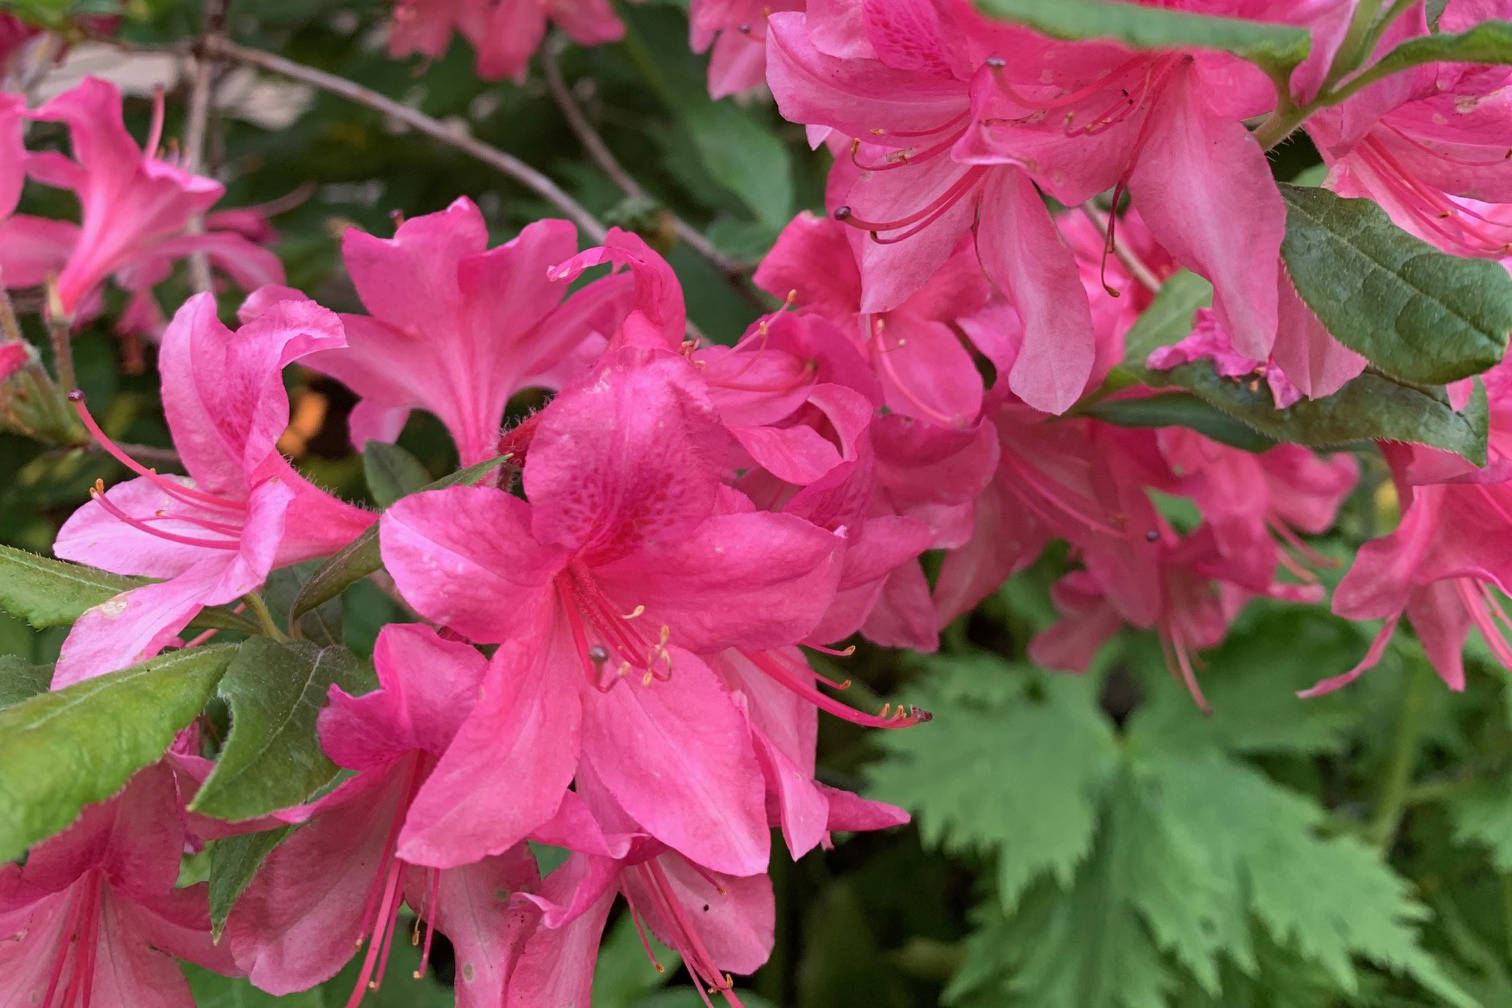 “Blooming azaleas — what a delight,” the Kachemak Gardener said on June 28, 2019, of the flowers in her Homer, Alaska, garden. “These are two of these shrubs here that manage a burst of color each year.” (Photo by Rosemary Fitzpatrick)